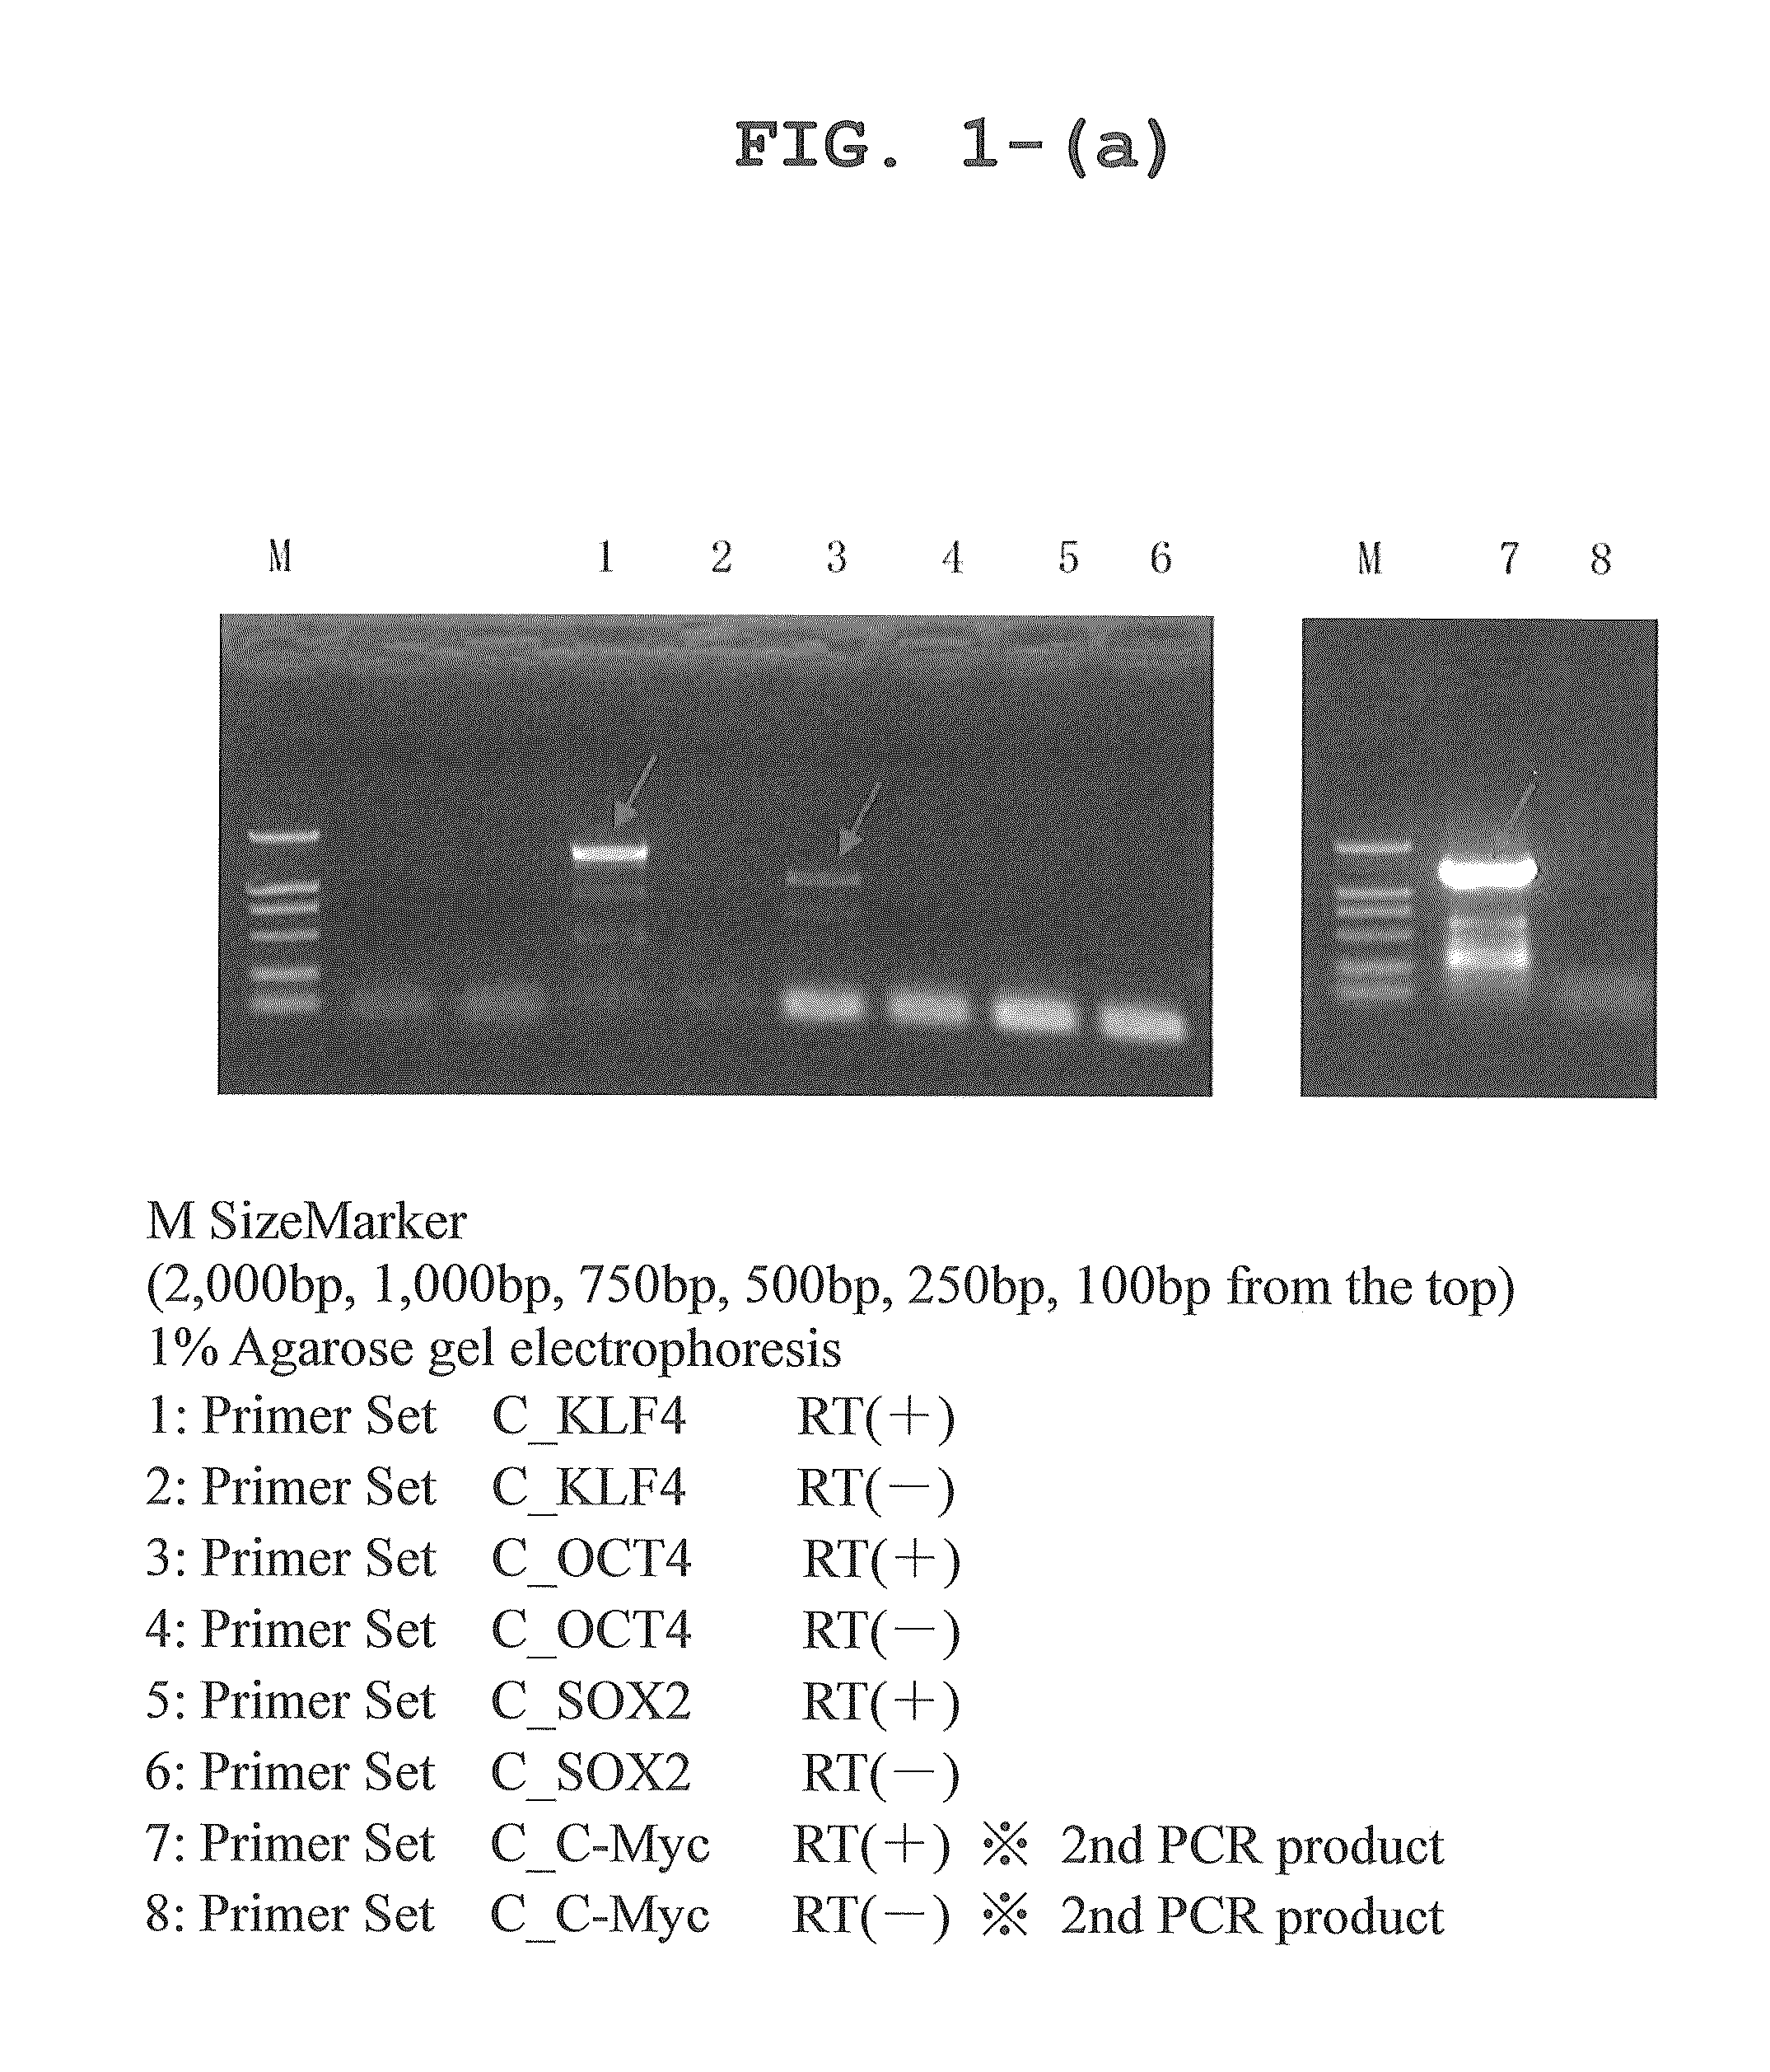 Canine iPS cells and method of producing same